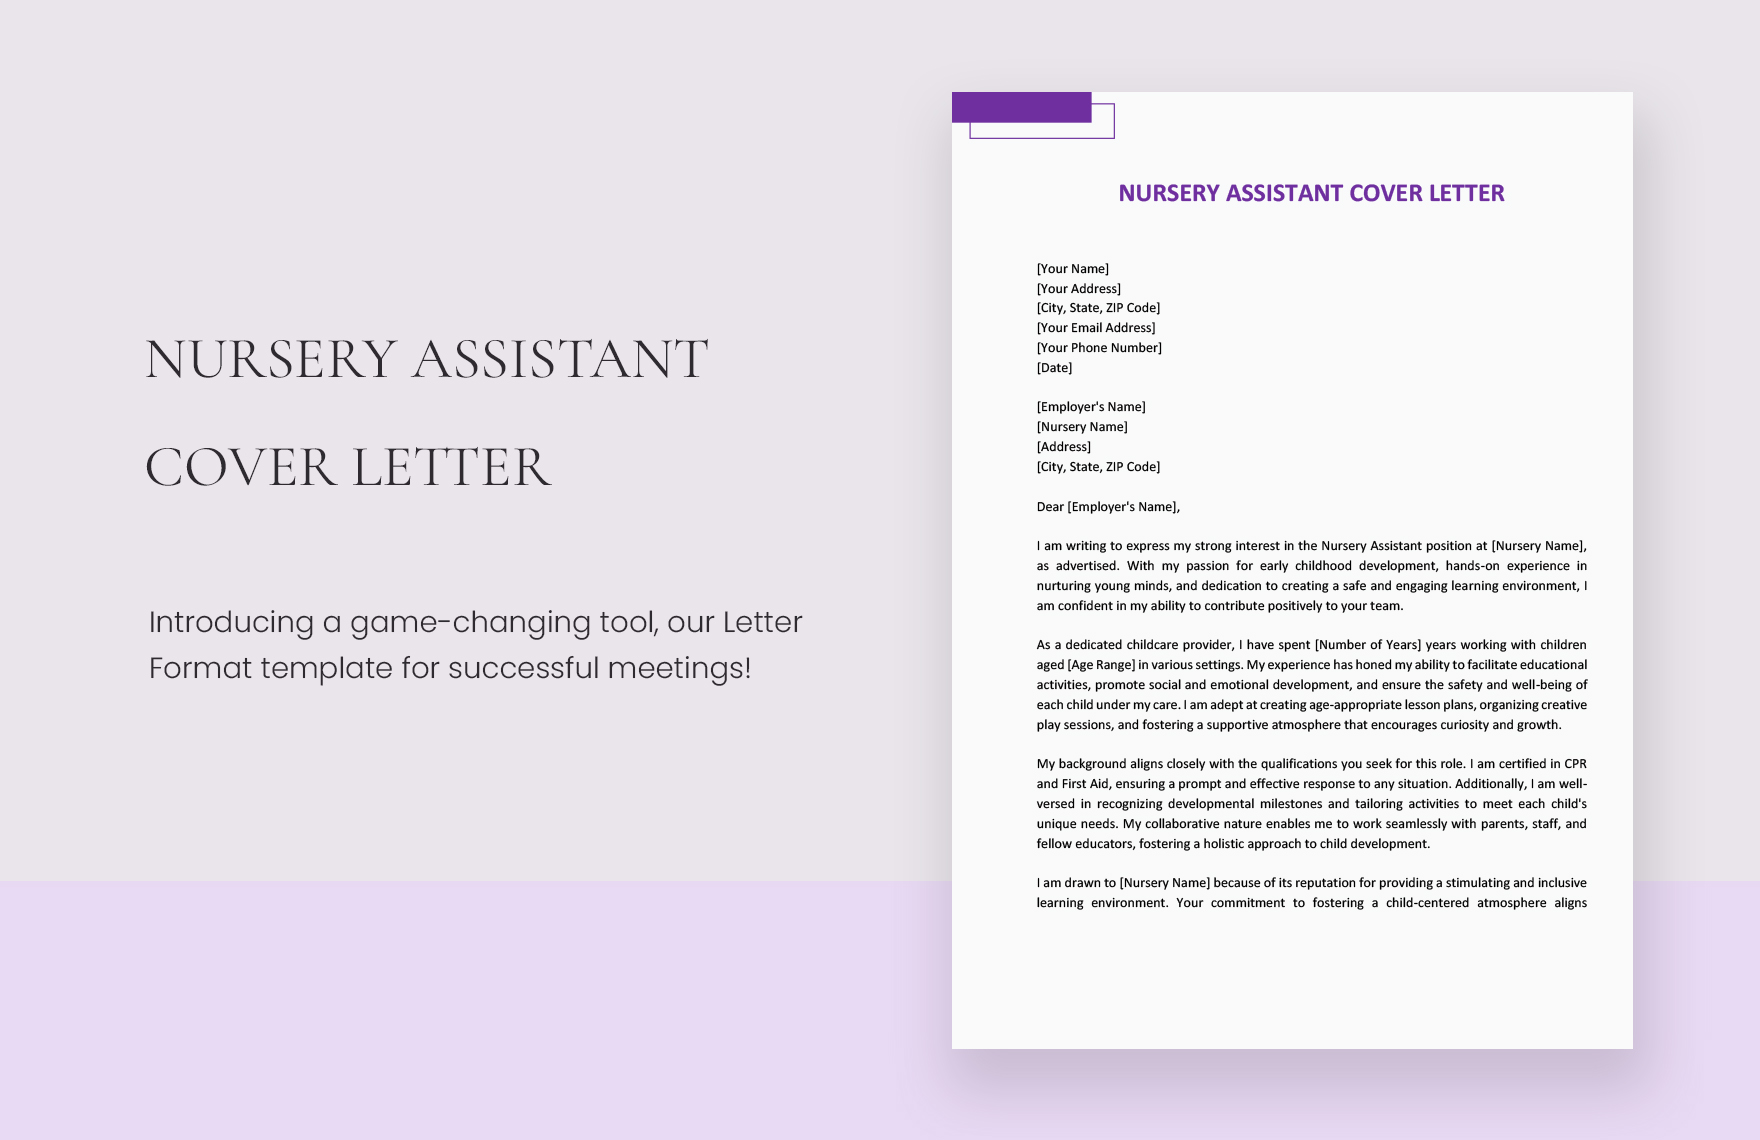 Nursery Assistant Cover Letter in Word, Google Docs, PDF